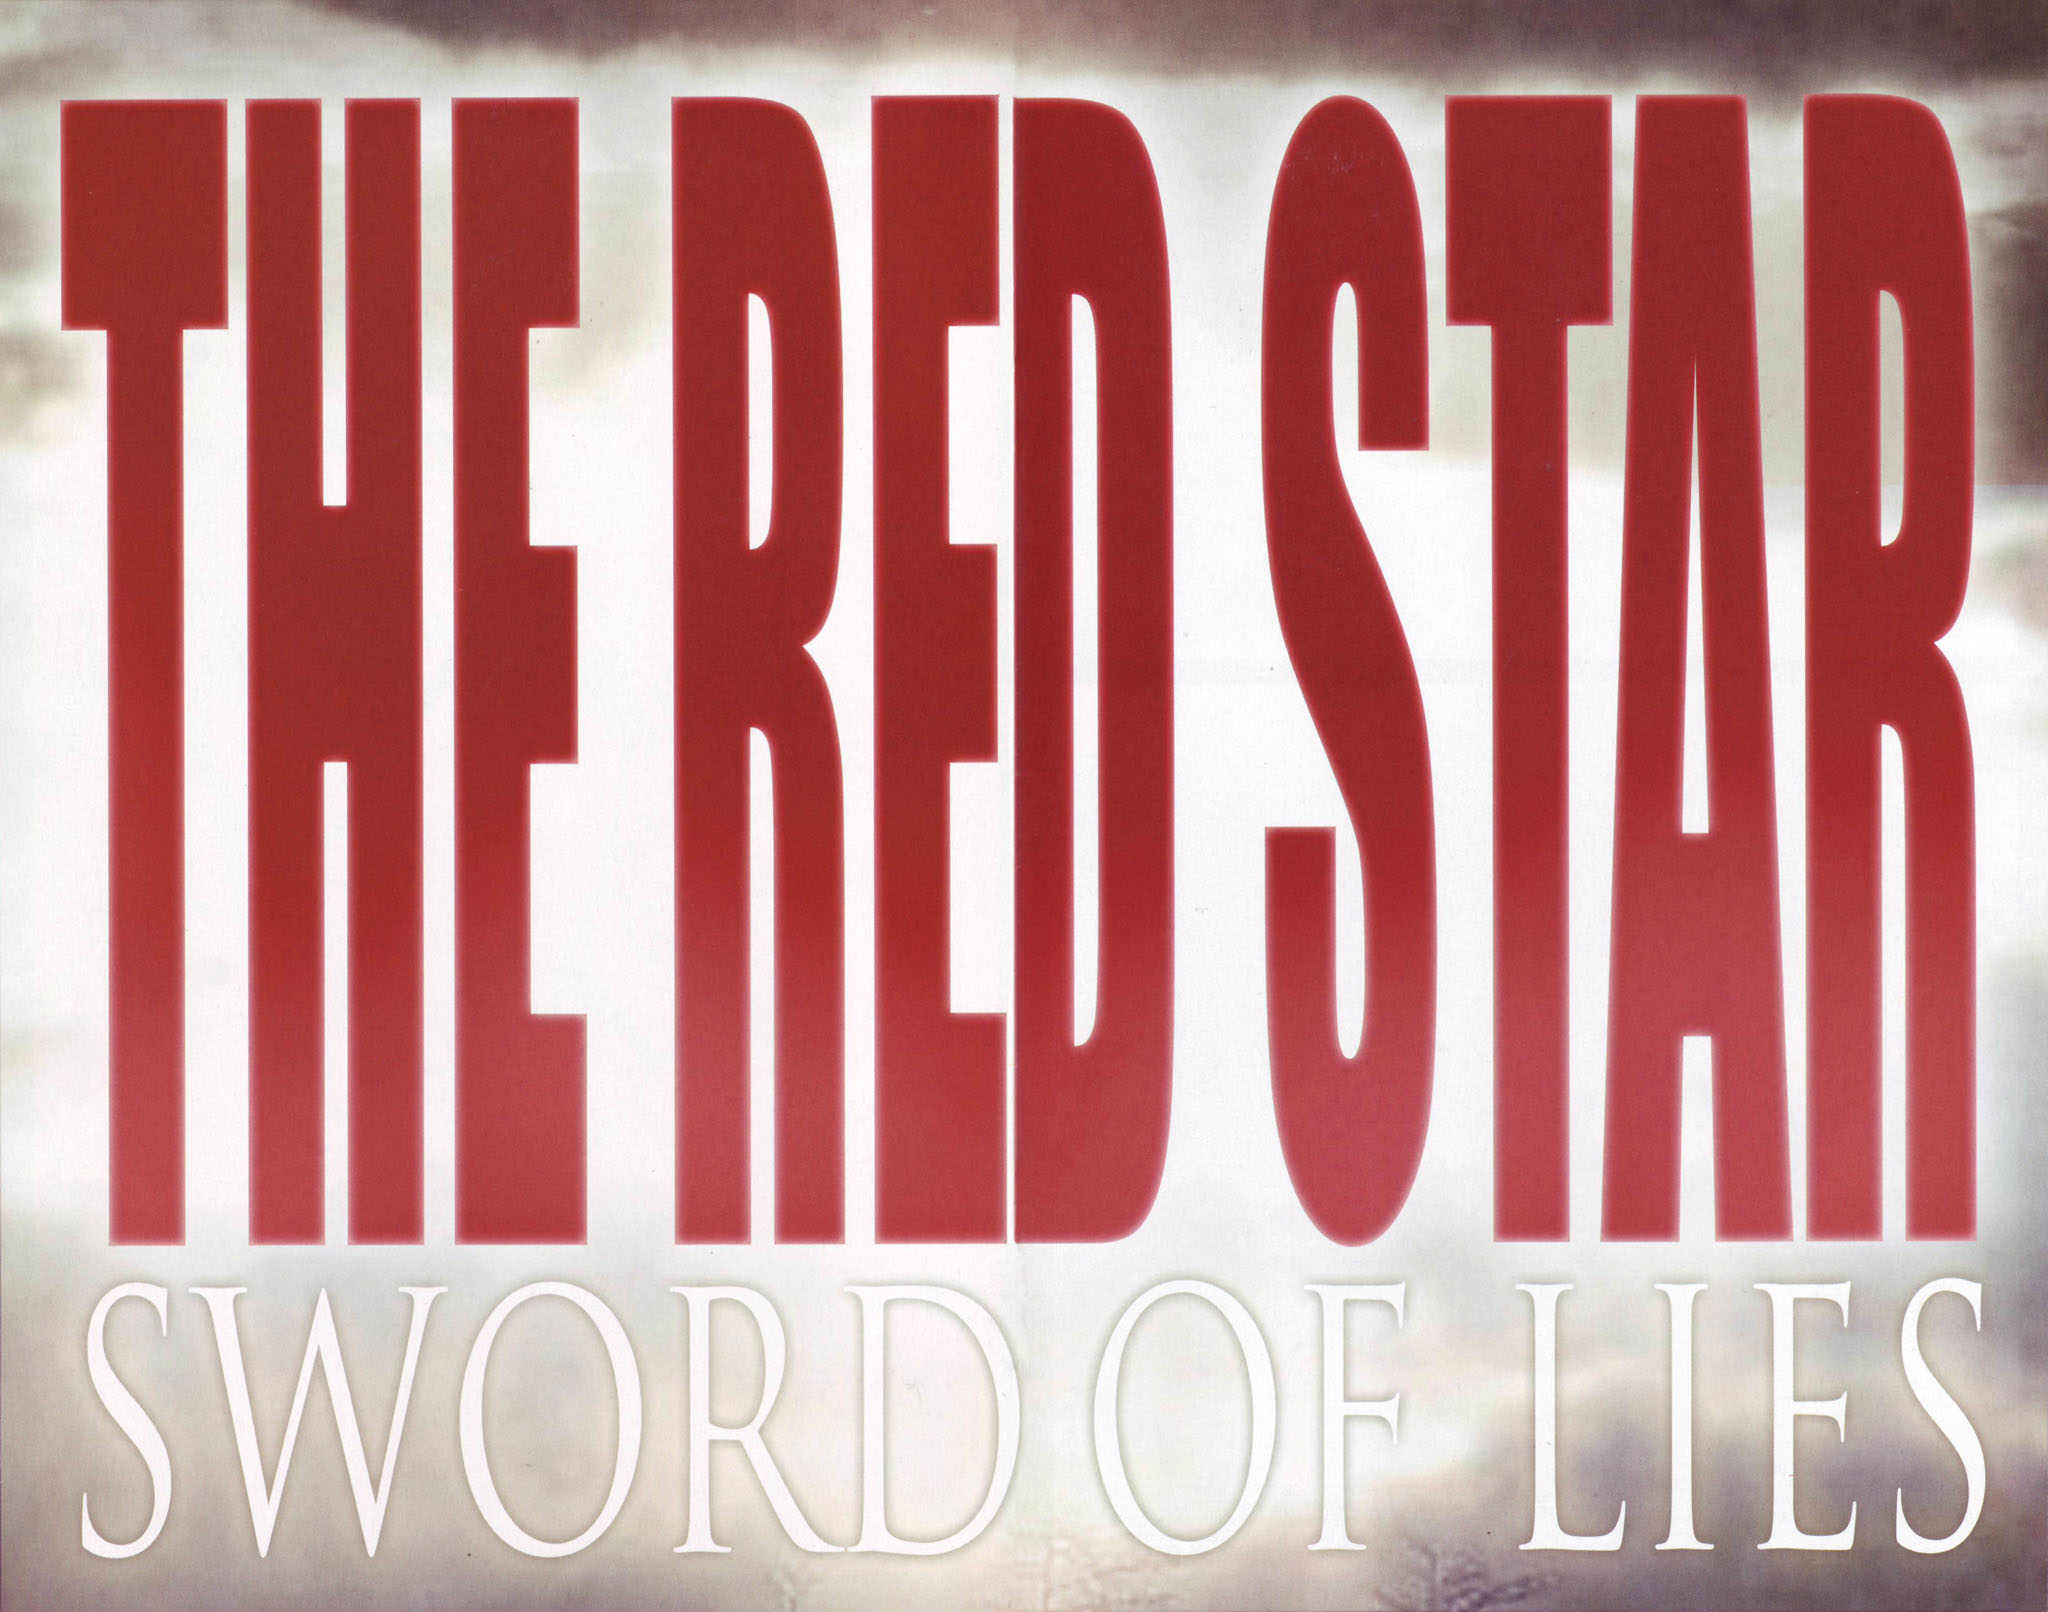 Read online The Red Star: Sword of Lies comic -  Issue #1 - 15